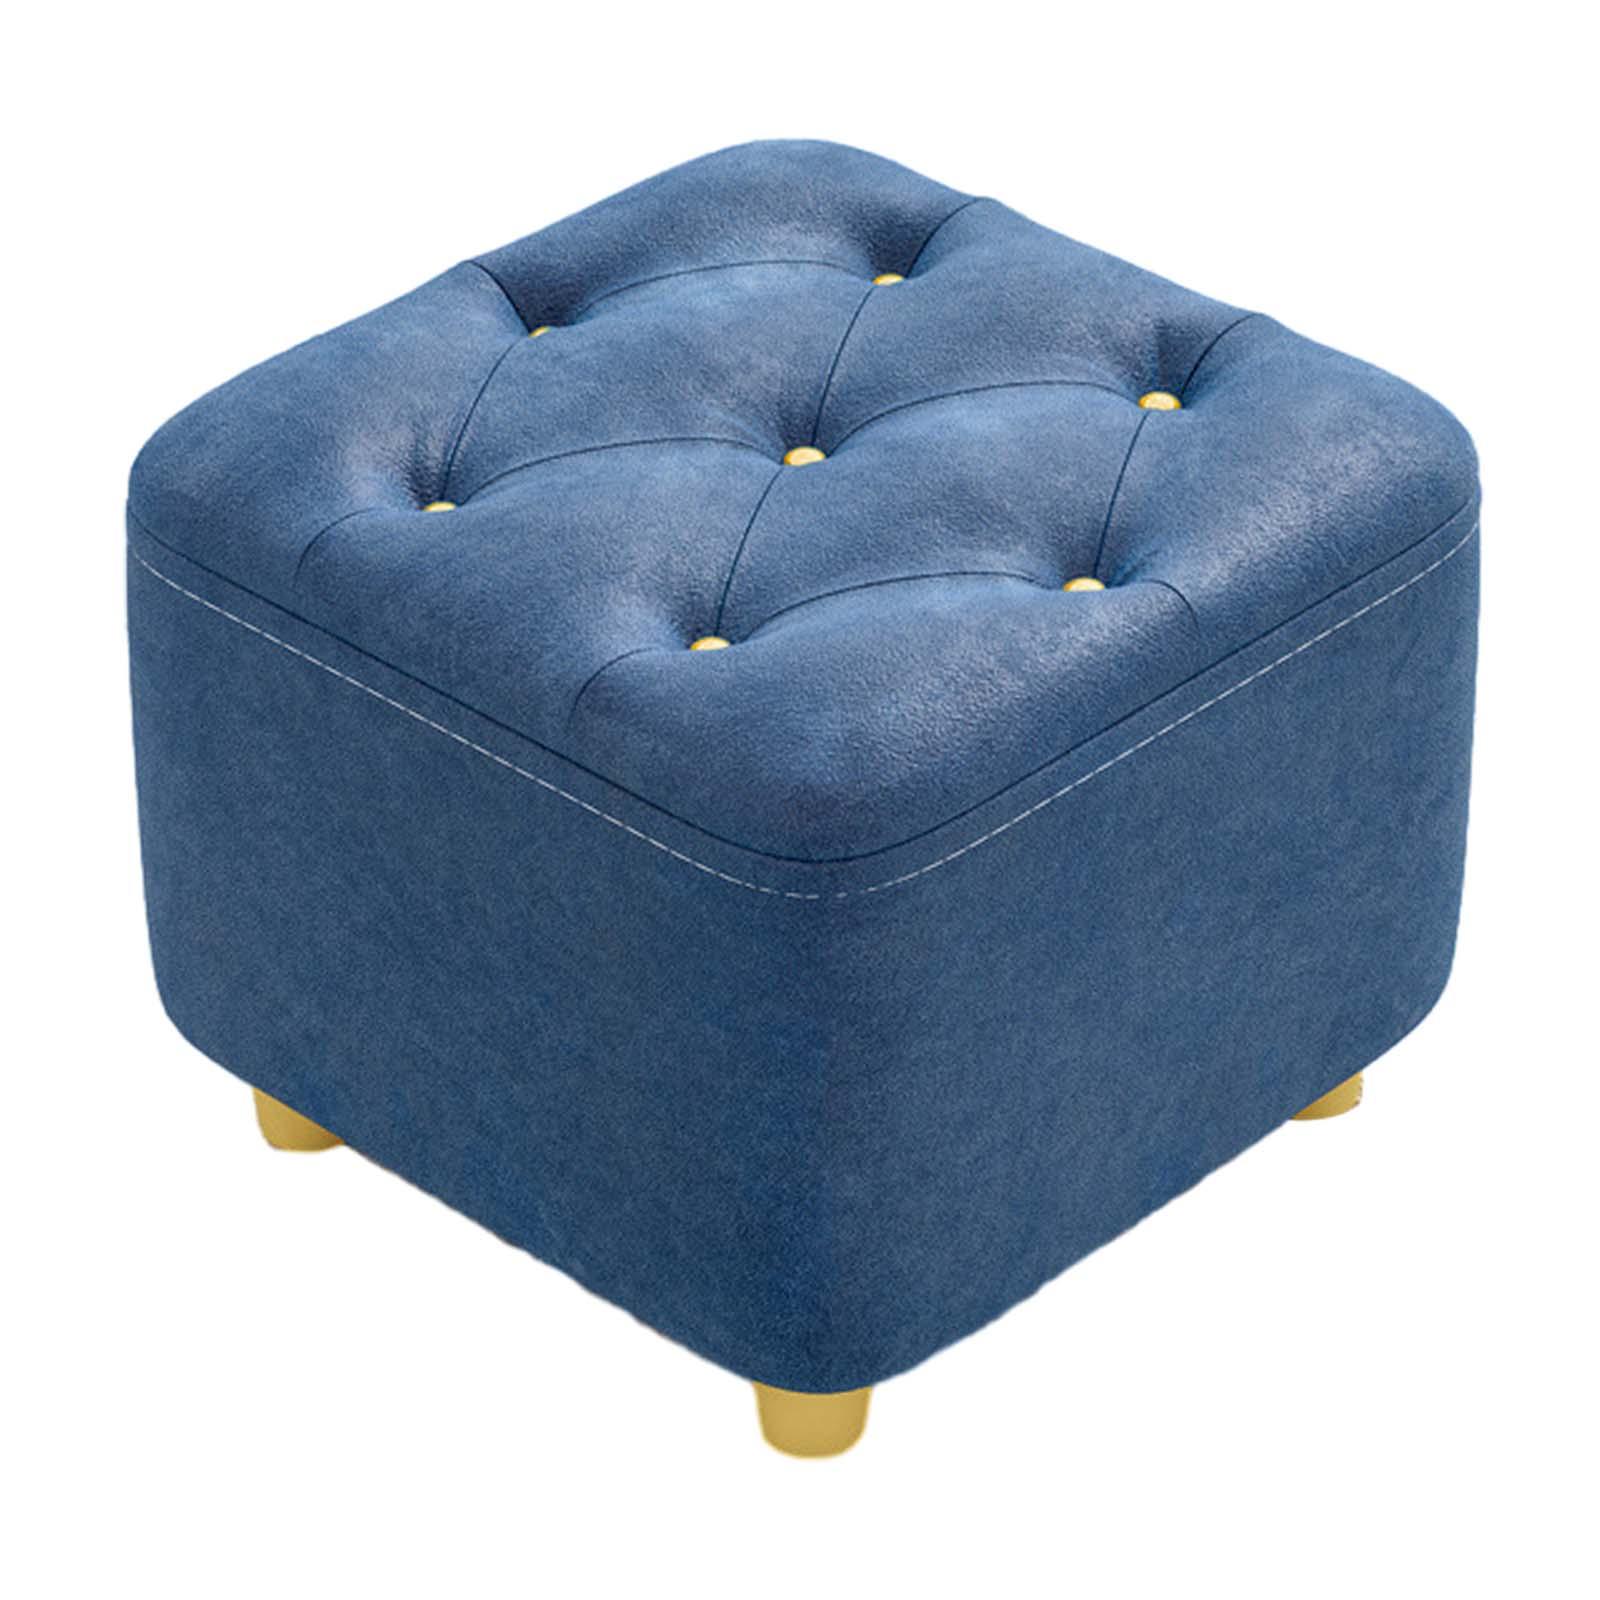 Square Footstool Foot Stool Comfortable Stepstool Creative Ottoman Stool Footrest for Living Room Dressing Room Bedroom Couch dark blue - image 4 of 8